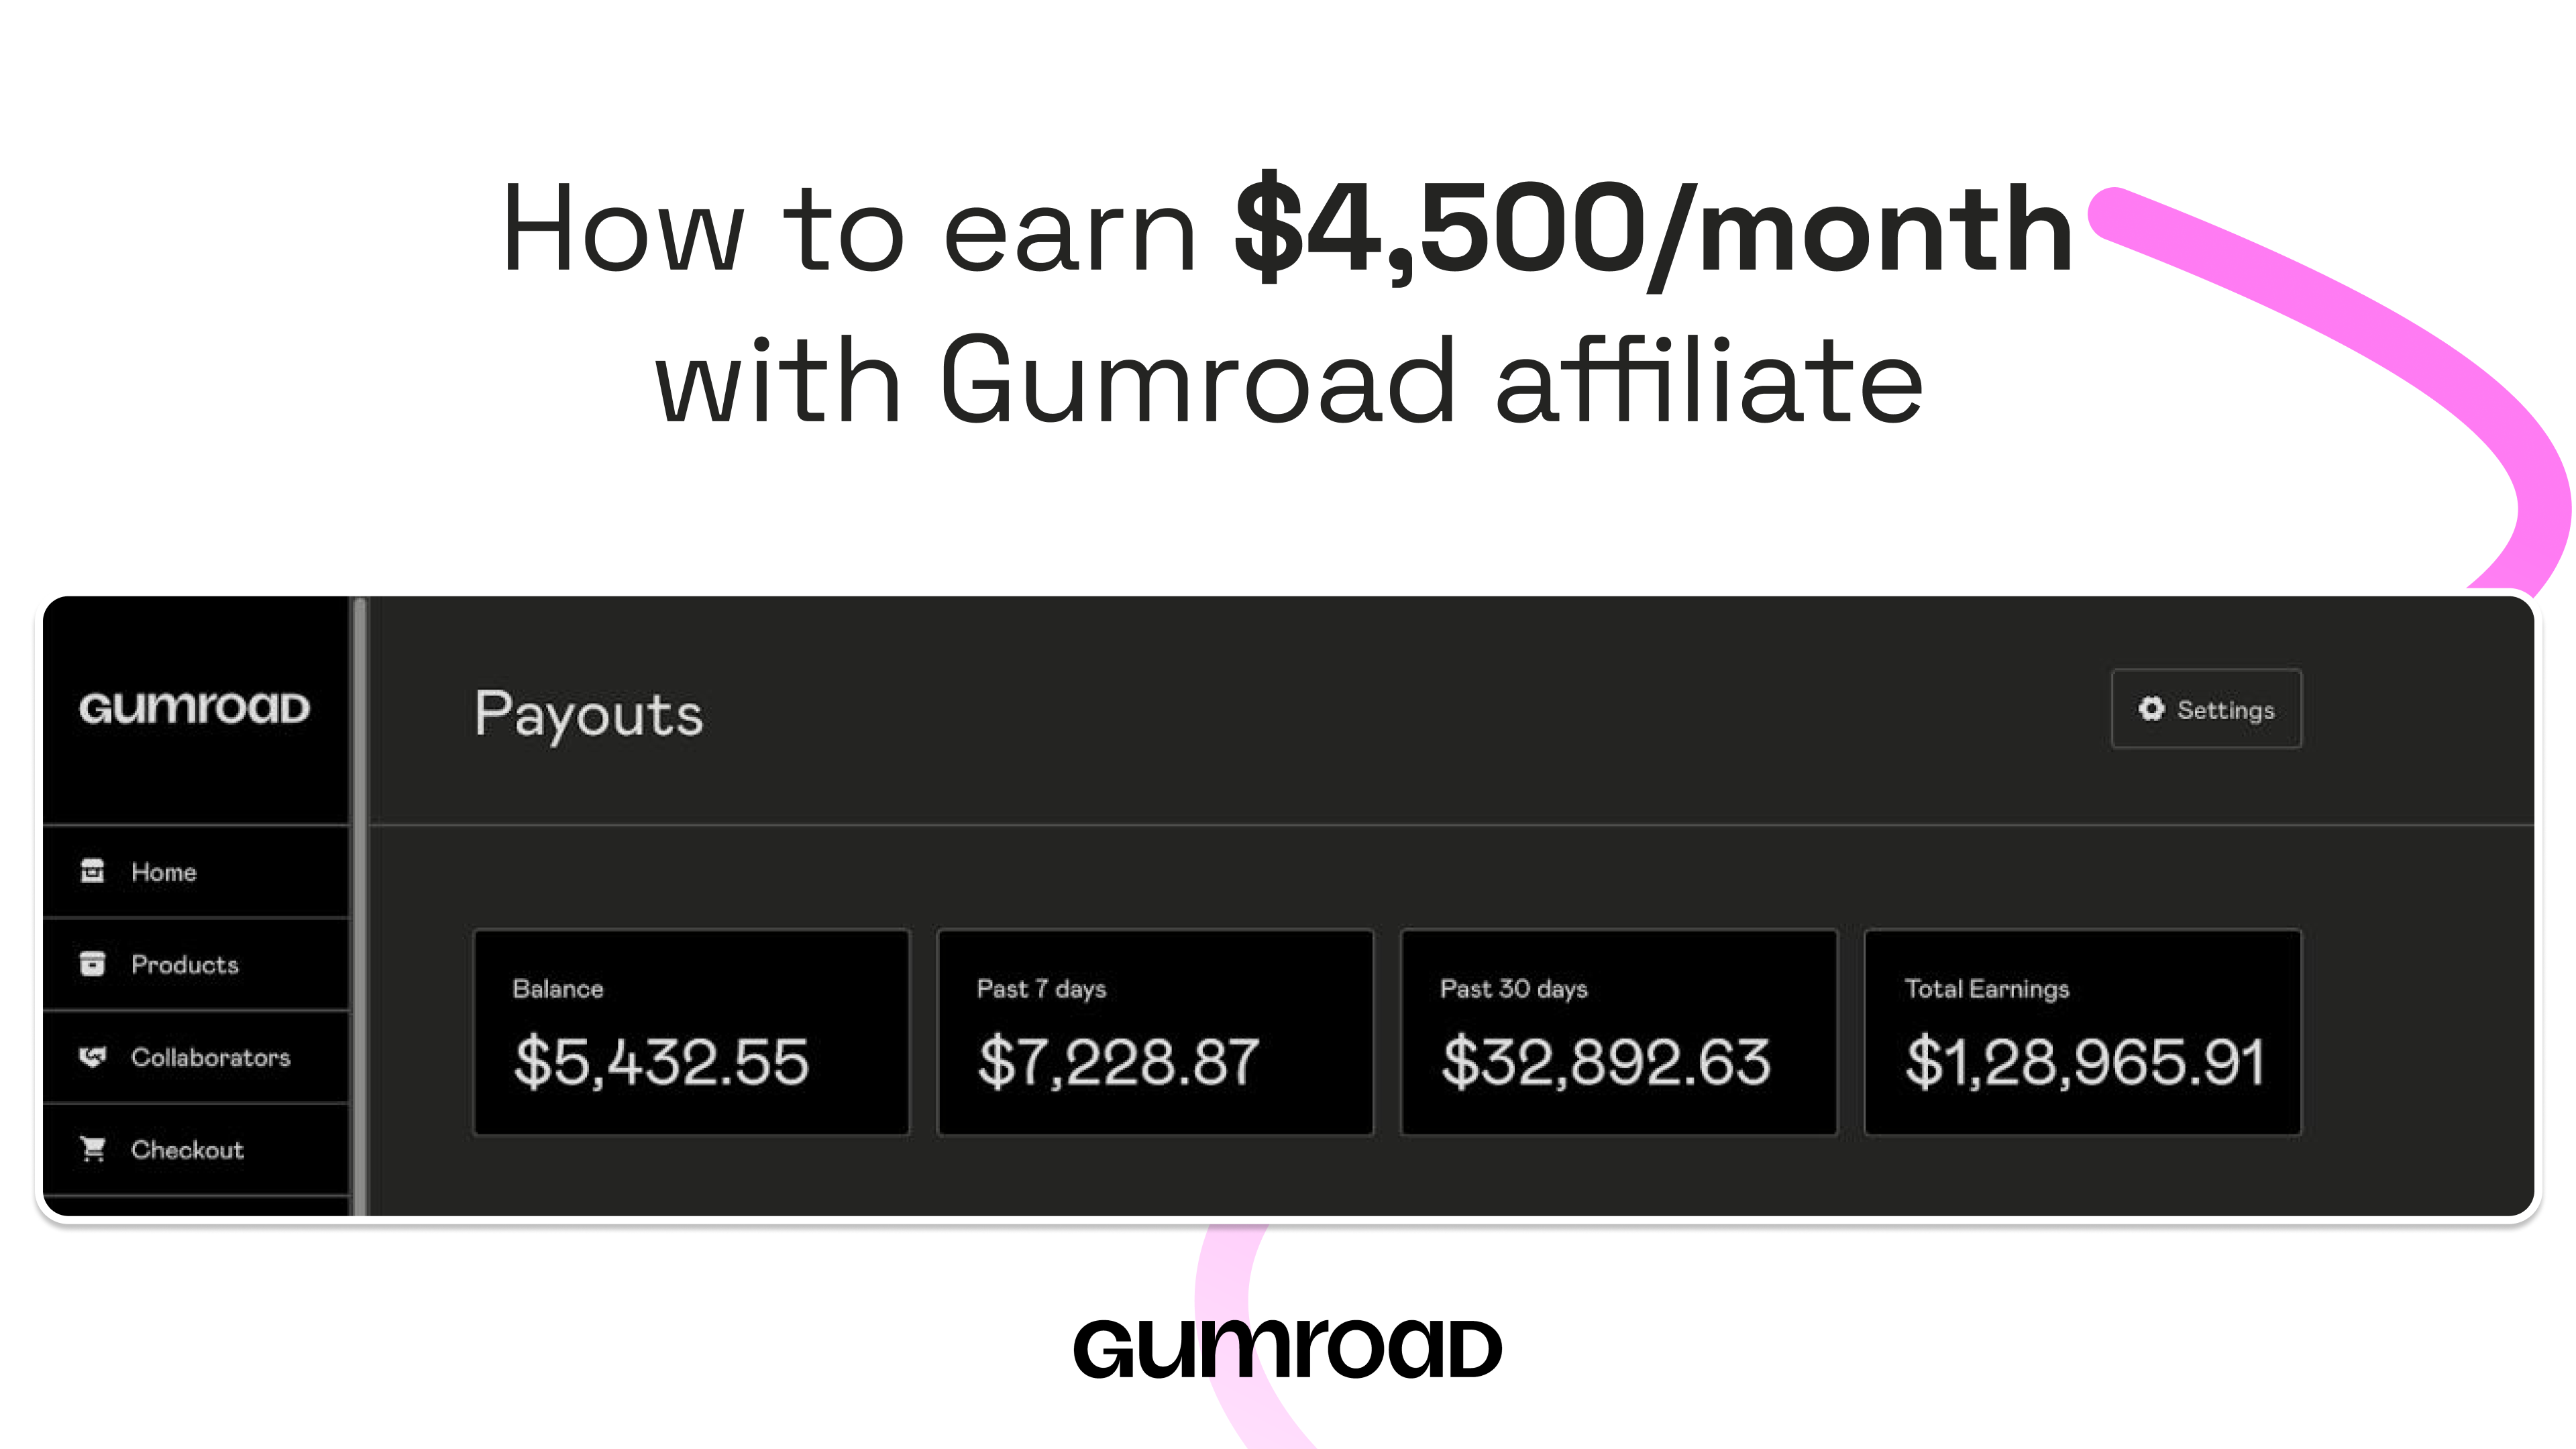 Gumroad Affiliate Program Guide to Earn $4,500/month